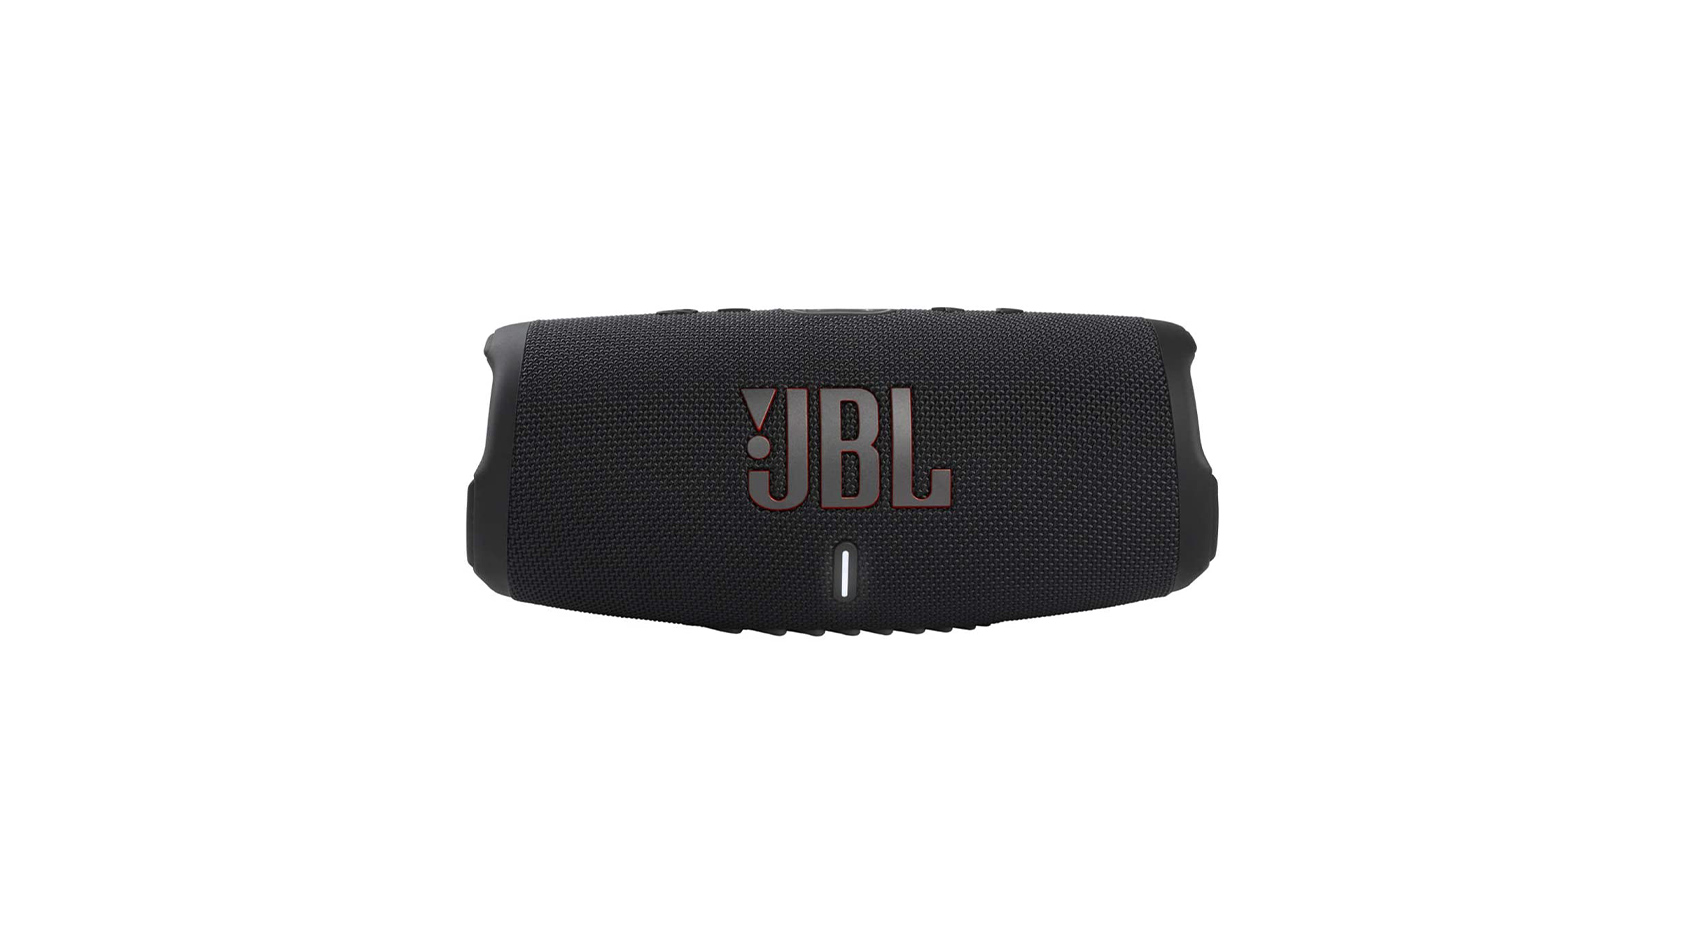 The JBL Charge 5 portable Bluetooth speaker in black against a white background.